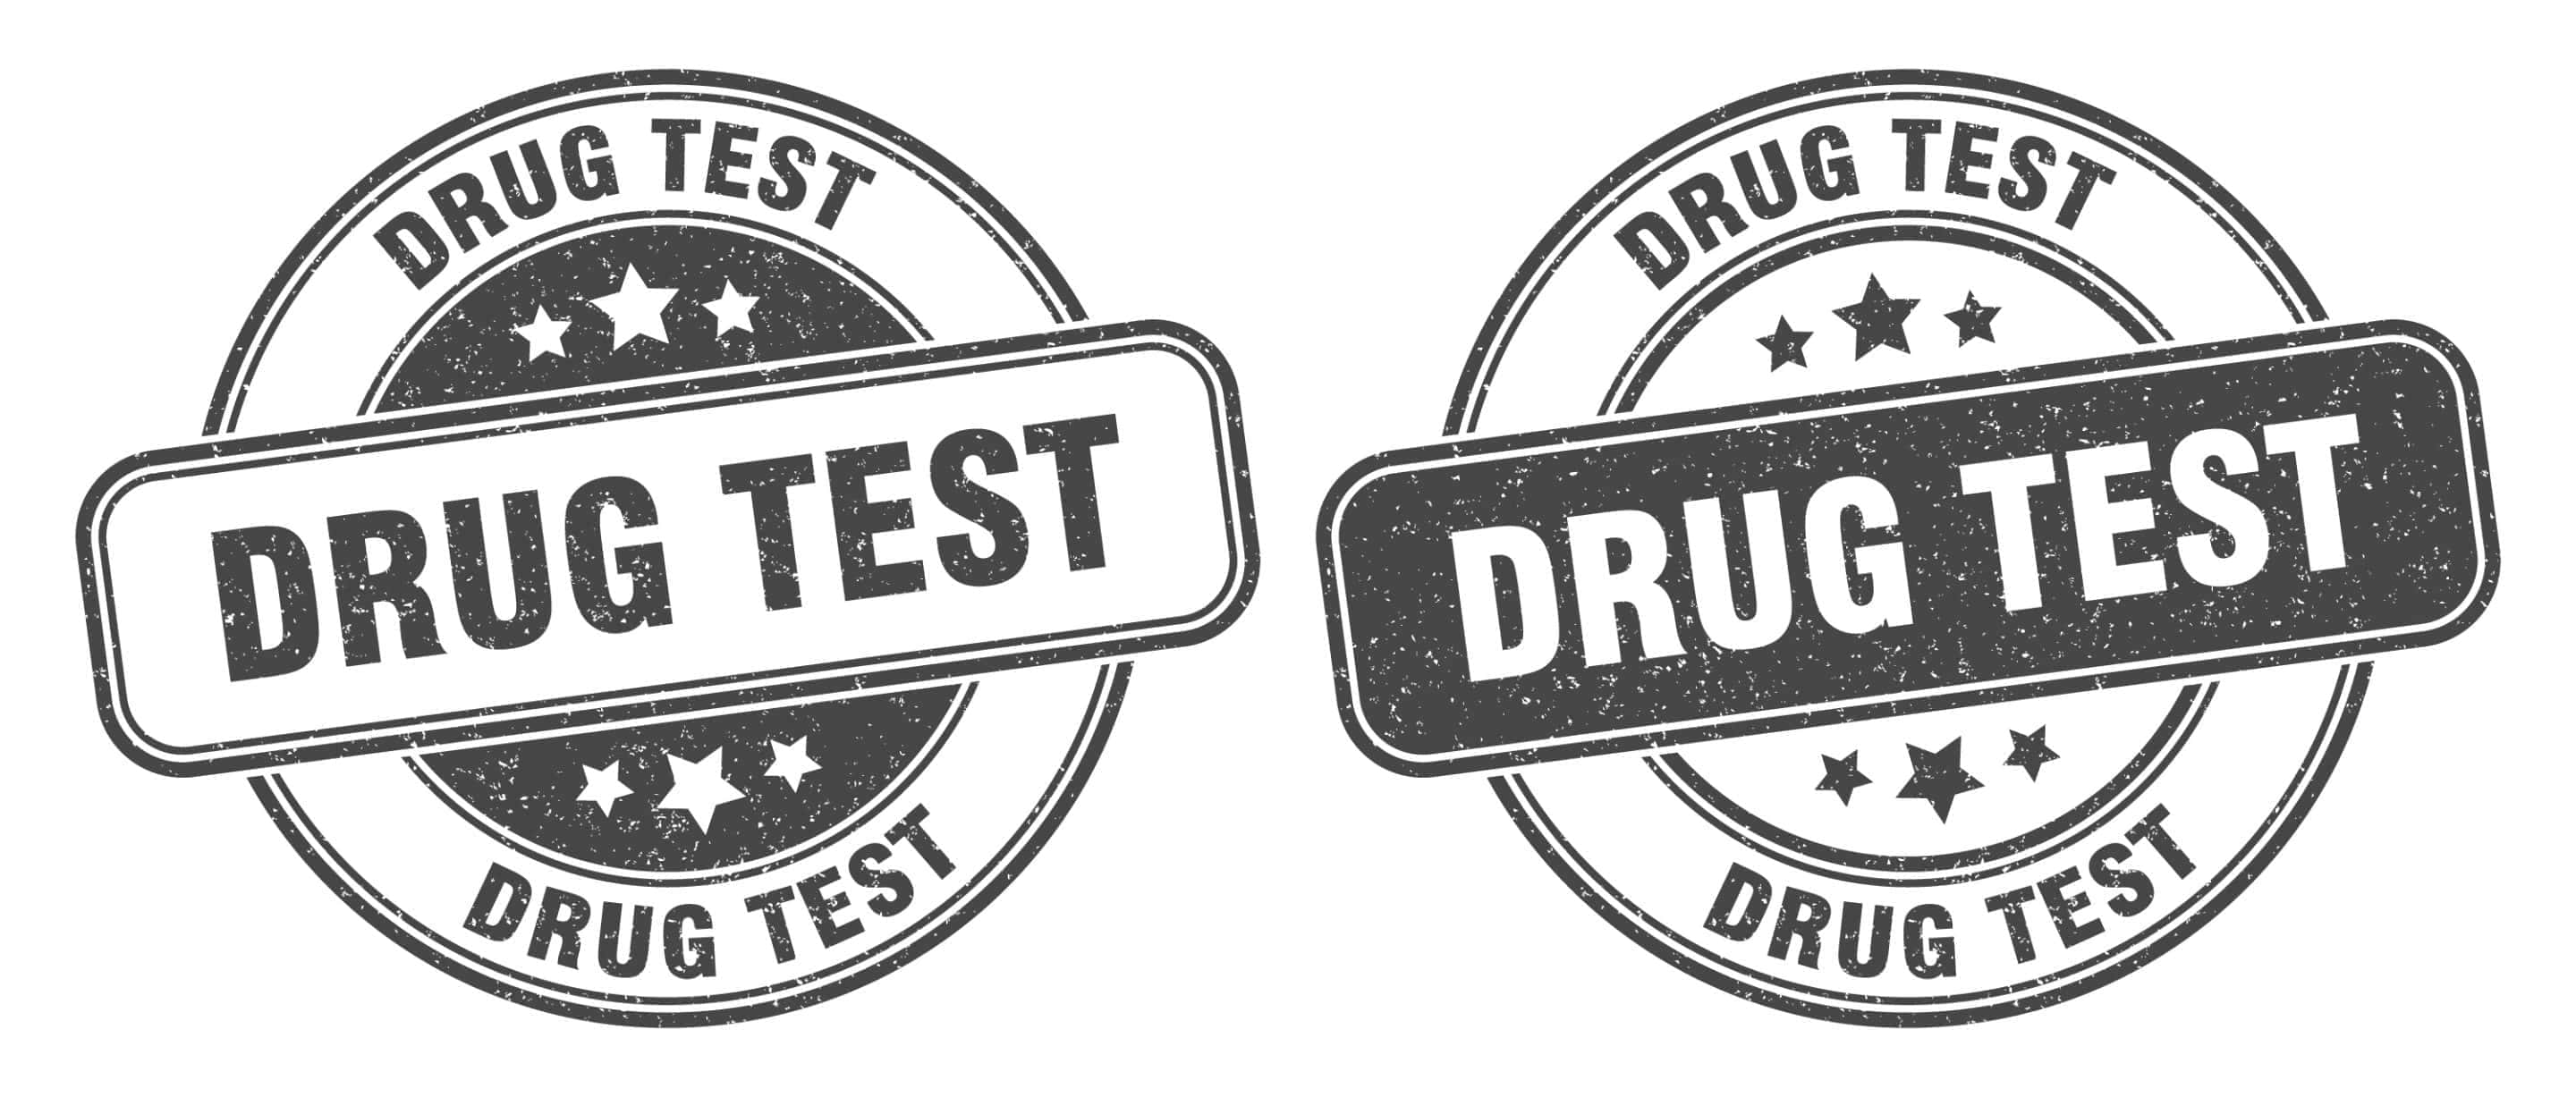 Does CBD Show Up on Drug Tests in the UK?